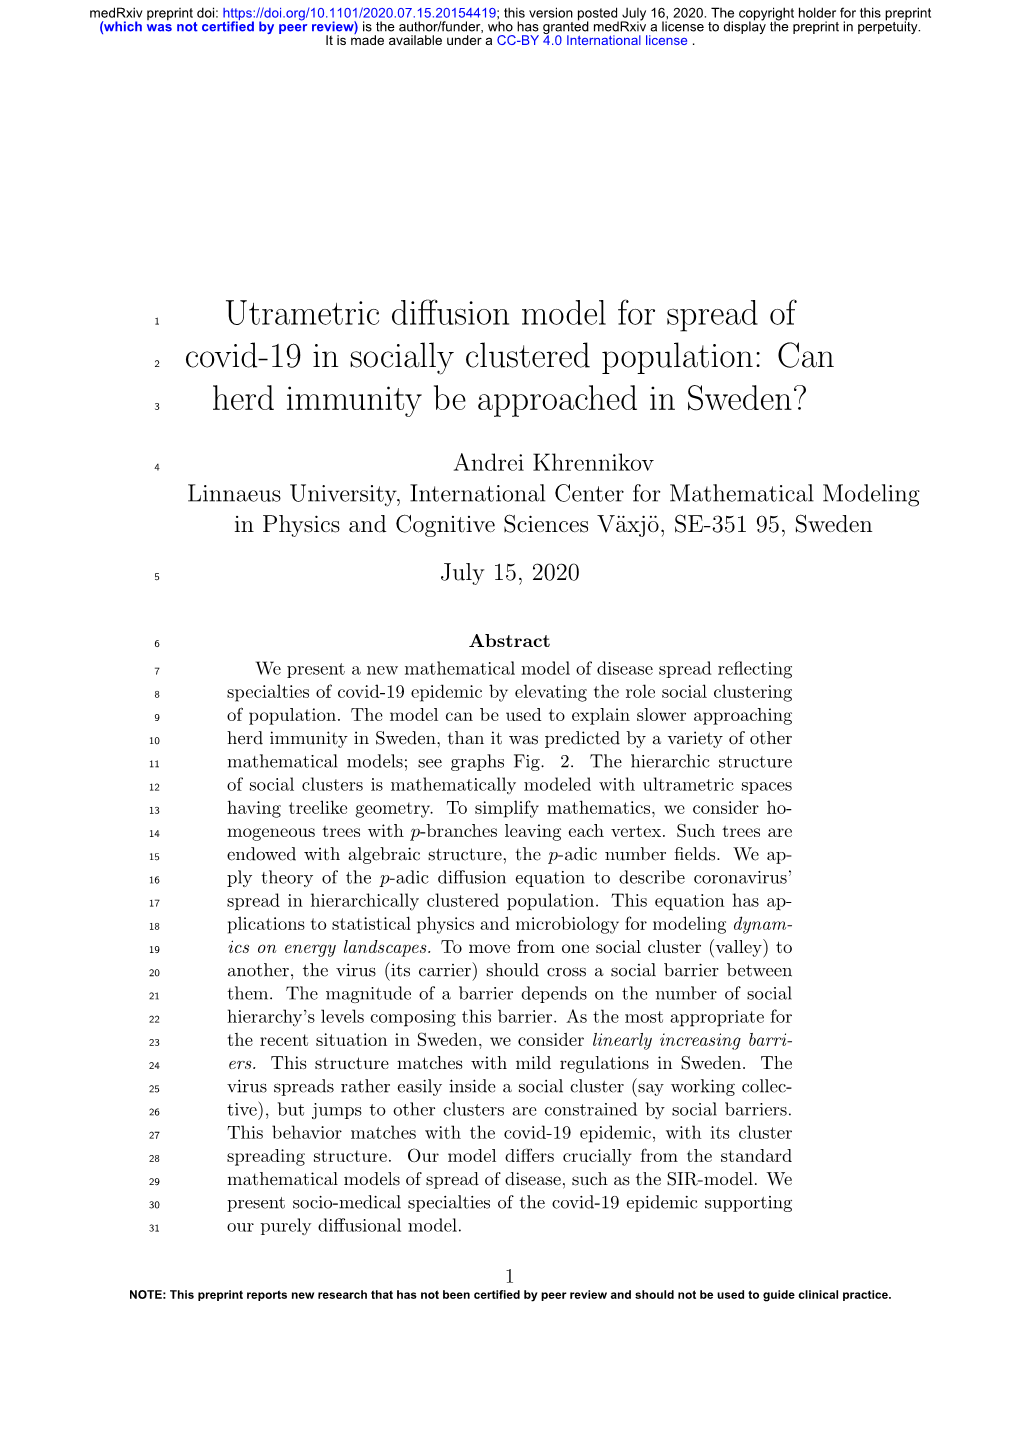 Utrametric Diffusion Model for Spread of Covid-19 in Socially Clustered